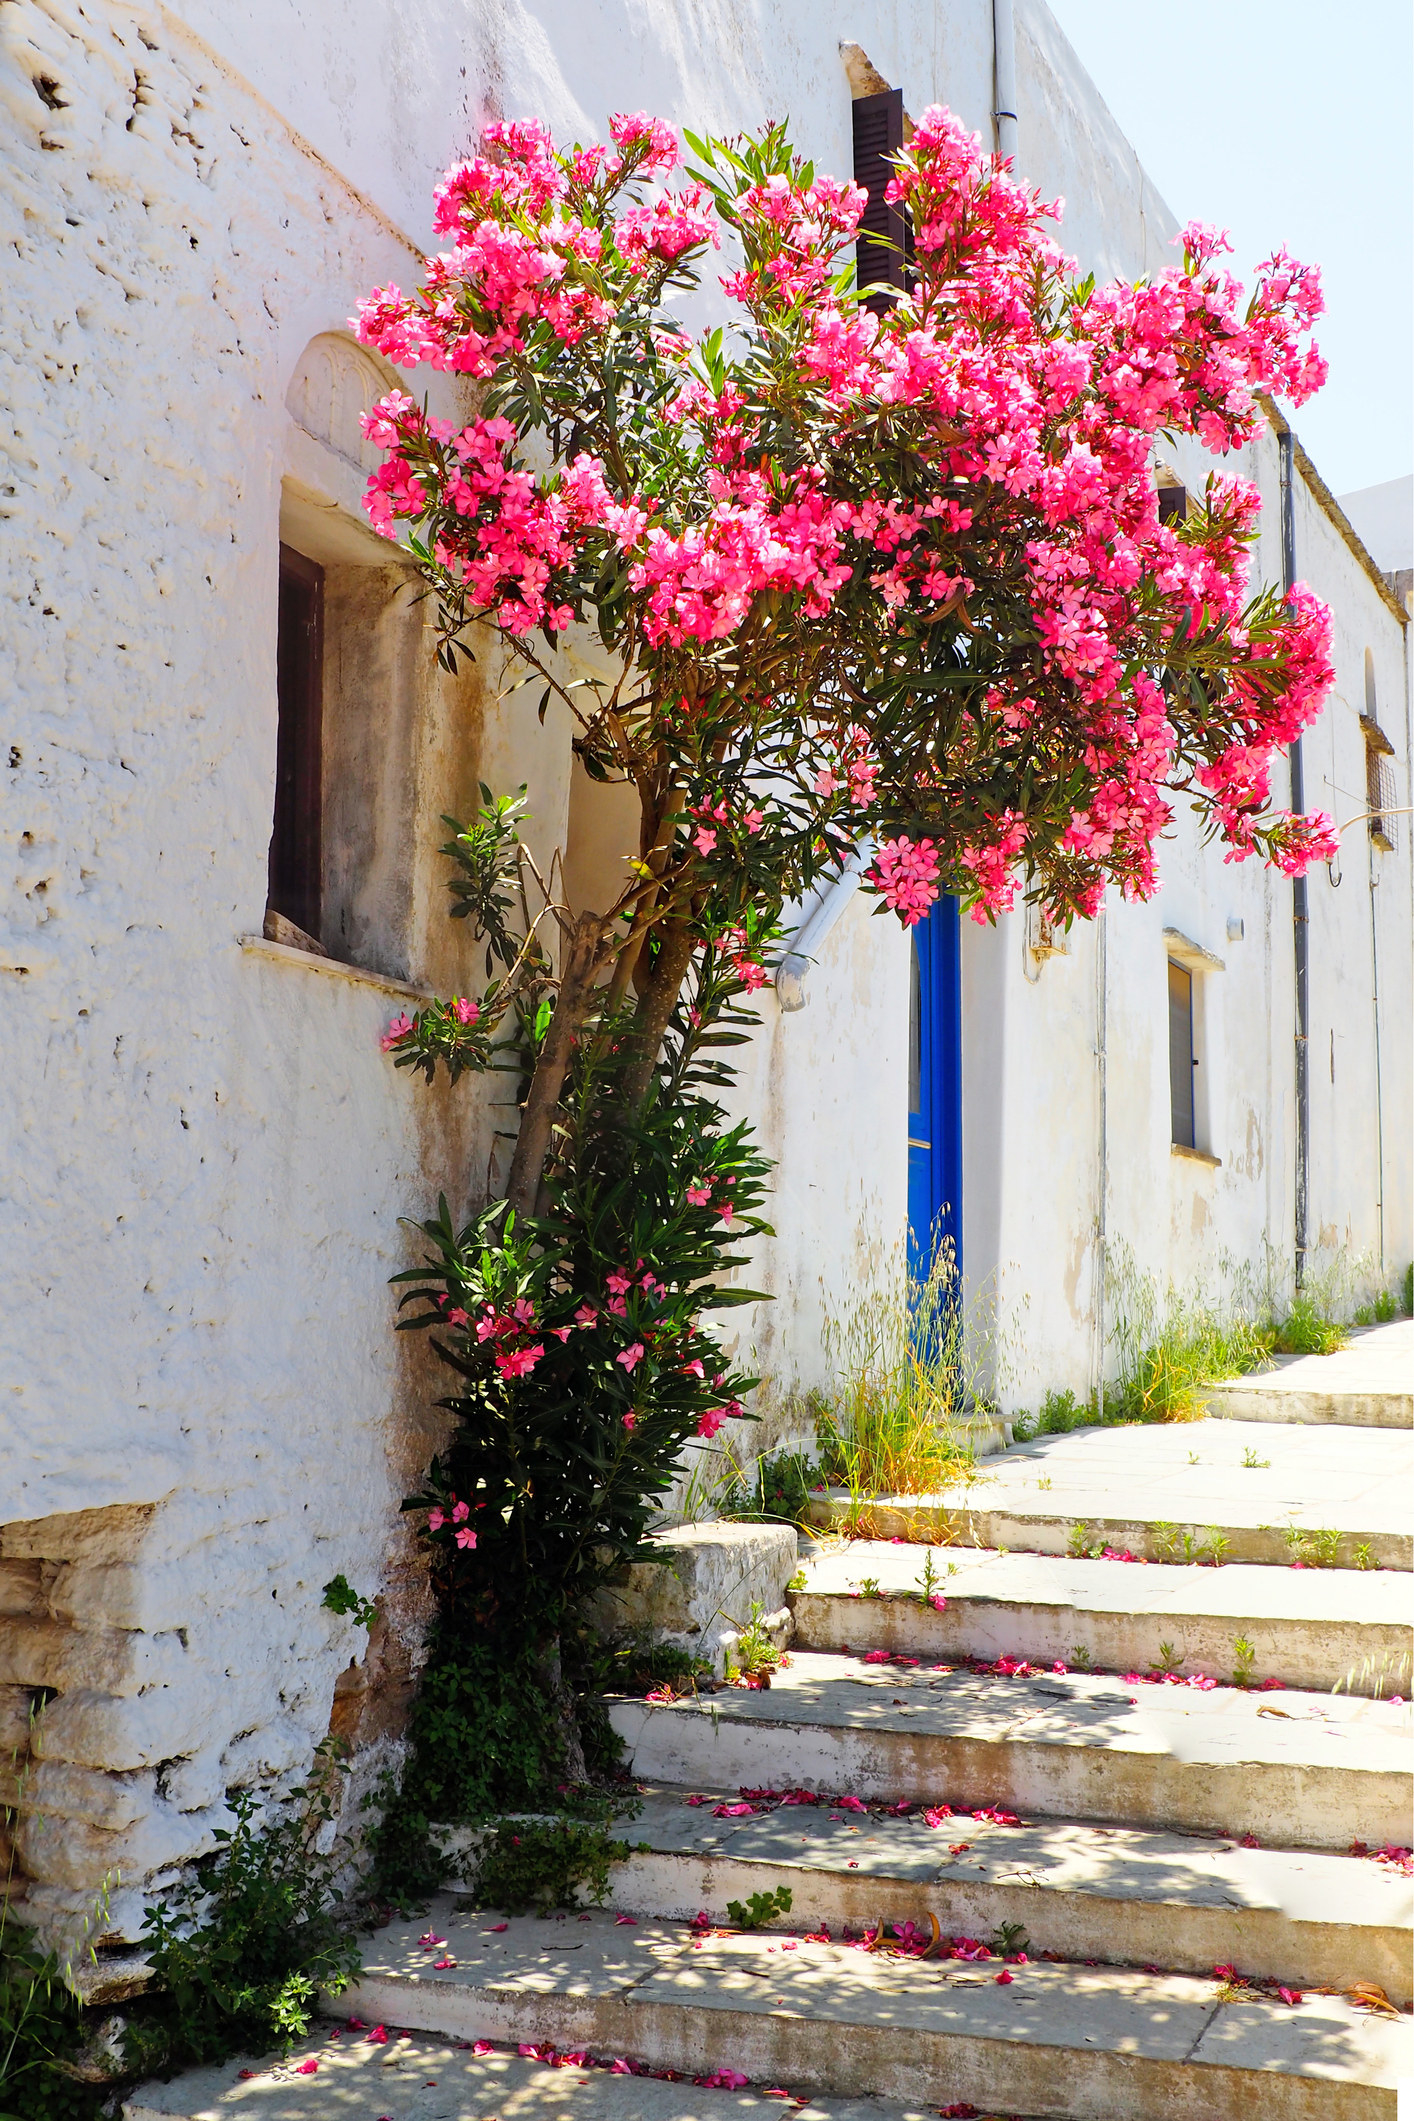 An alleyway with flowers in Tinos